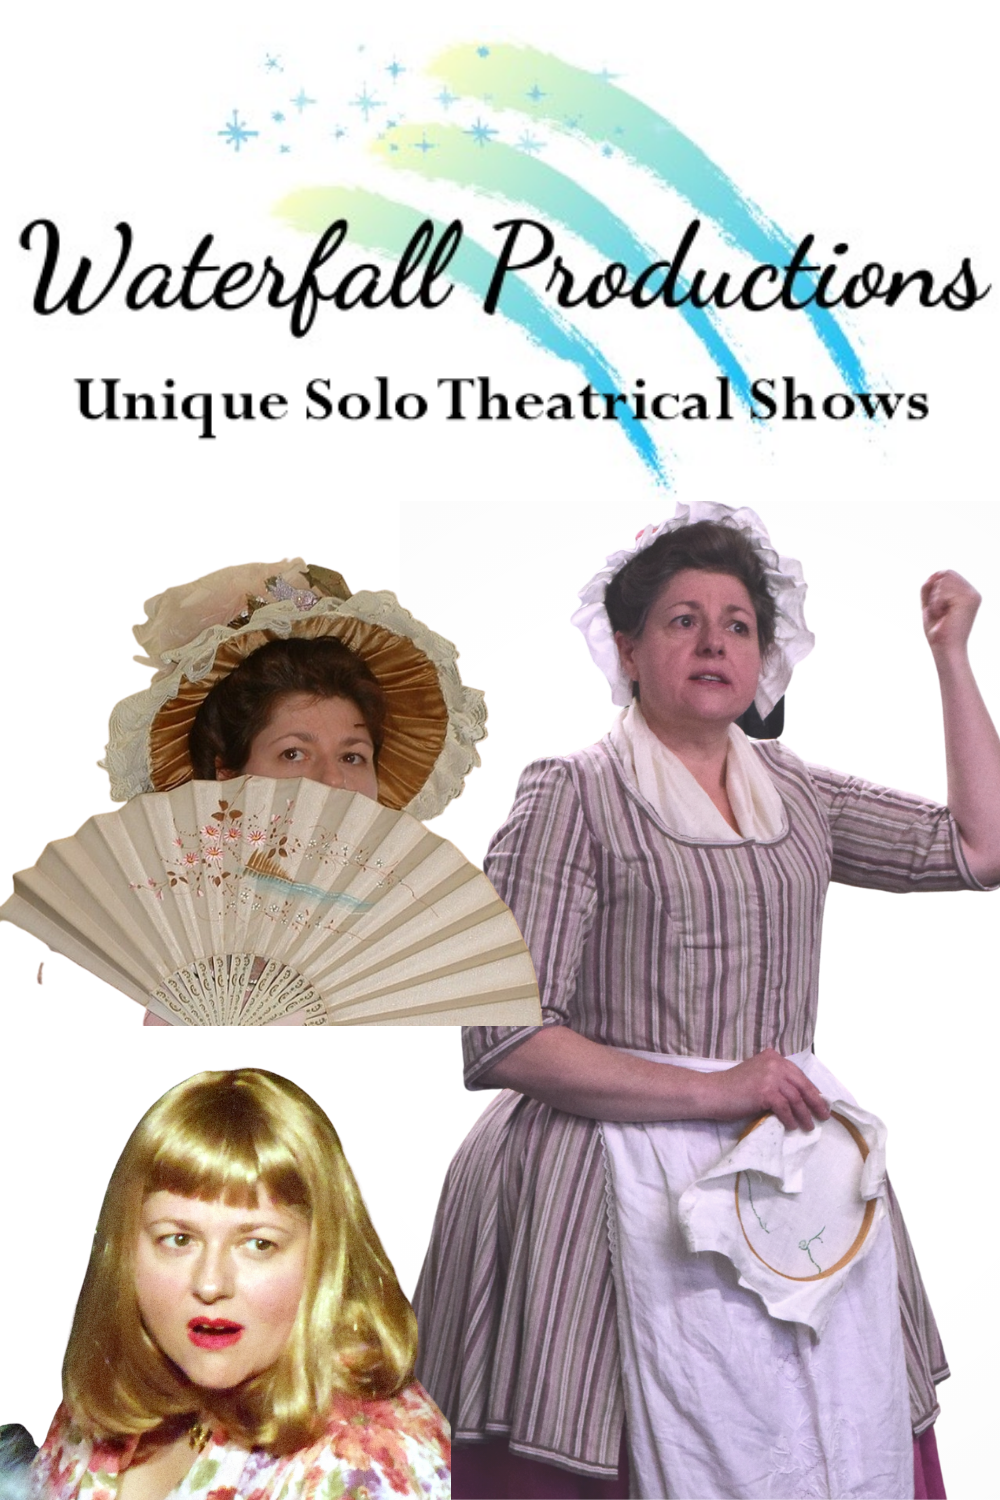 Waterfall Productions